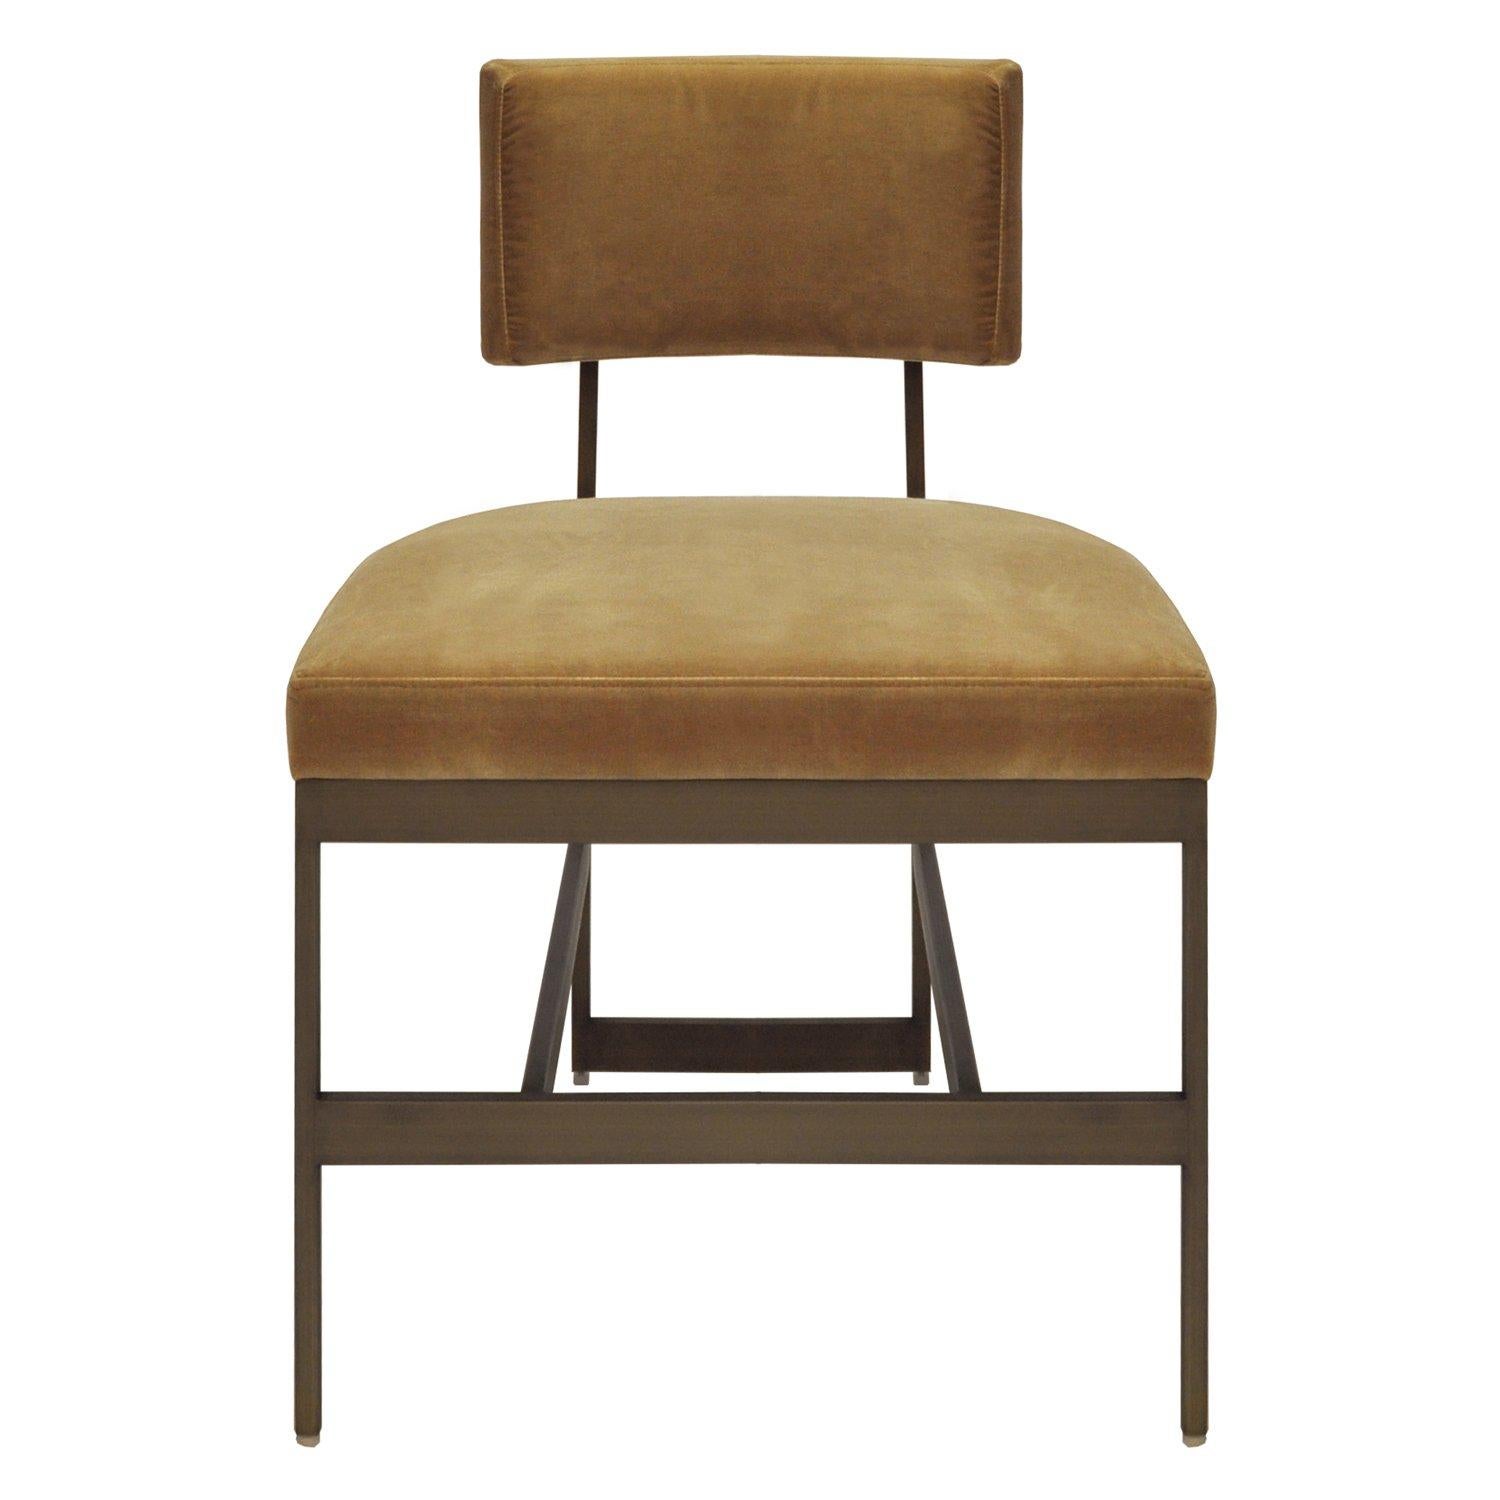 Available as a set of 6, these high end dining chairs are durably produced with a solid structure upholstered in a premium quality camel velvet. Each frame is produce with welded metal and finished in an antique bronze that compliments the color and